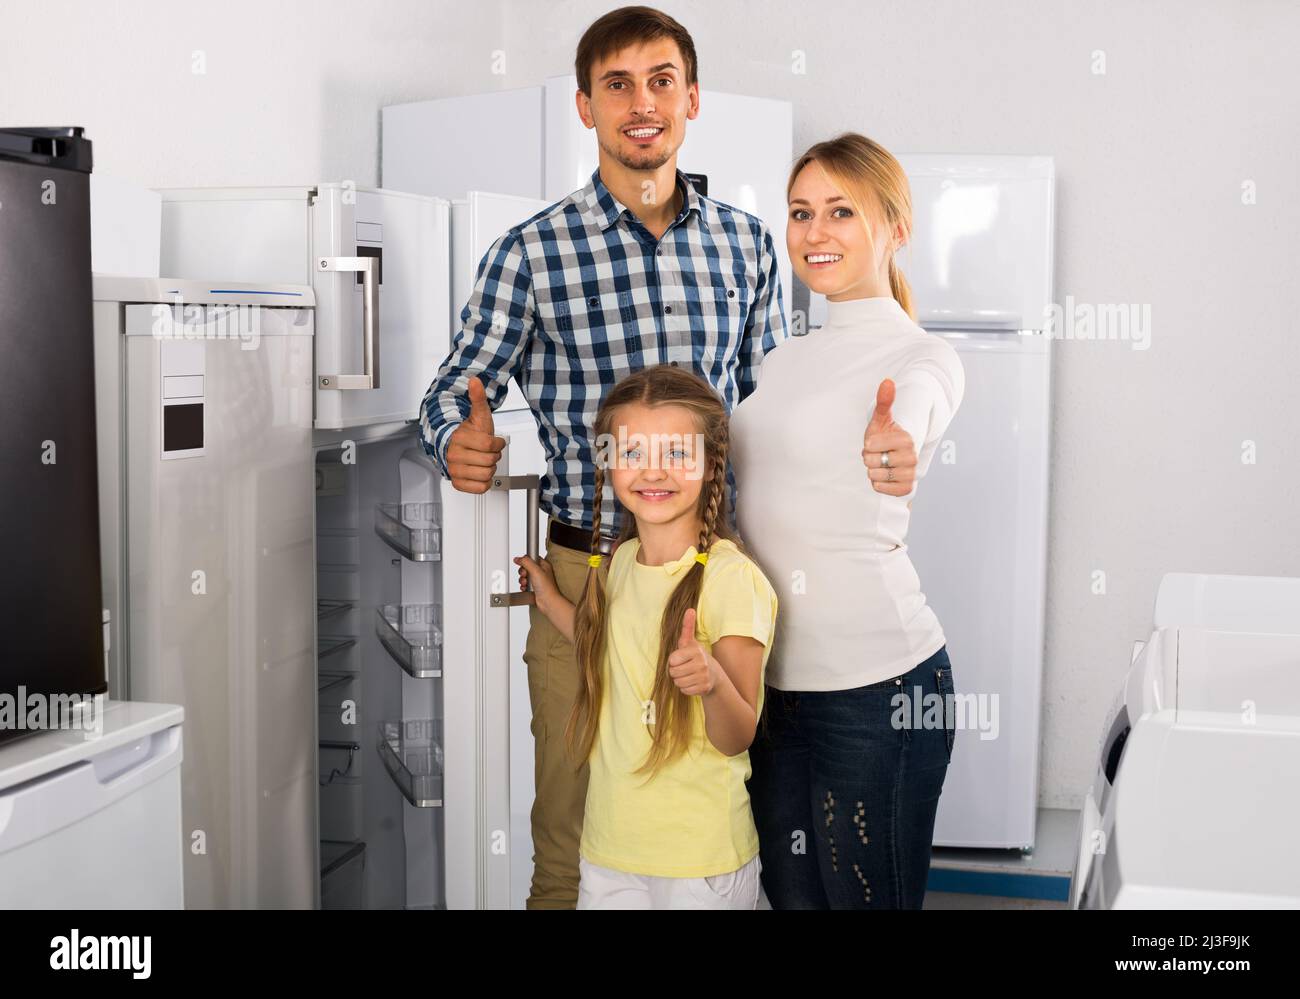 Family with child choosing refrigerator Stock Photo